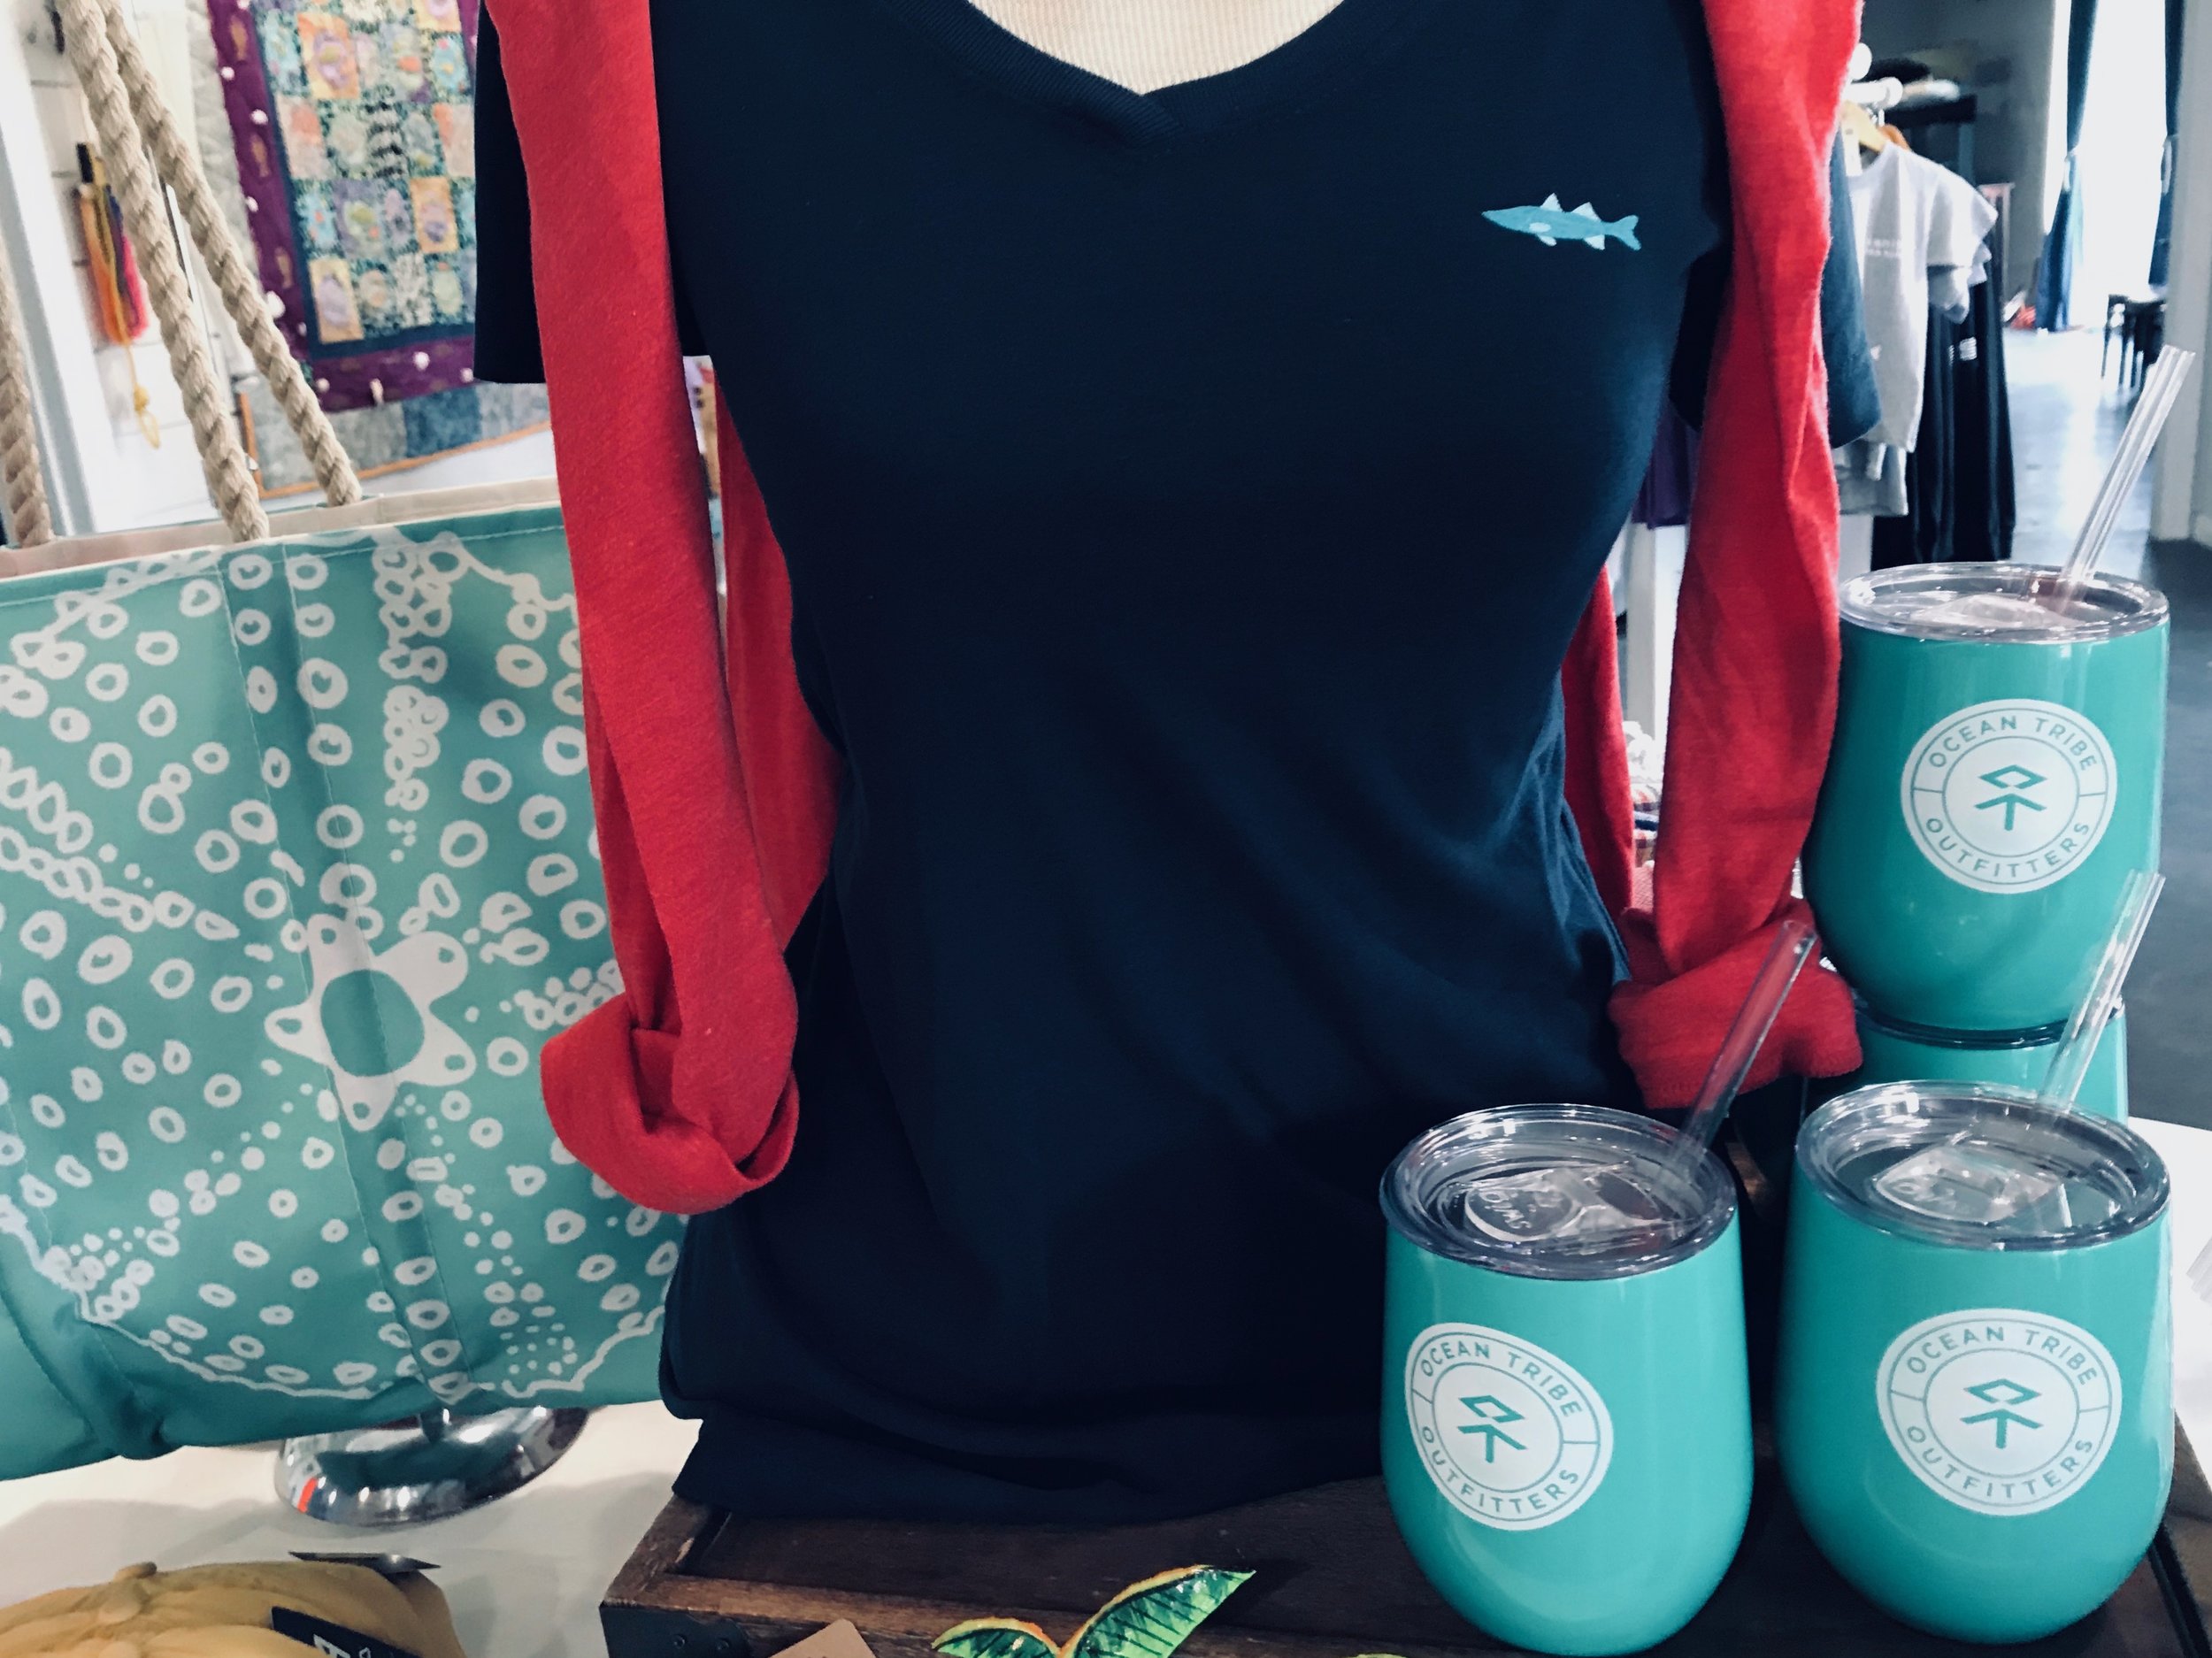 Insulated reusable cups are perfect for sipping your favorite beverage on the boat or beach.